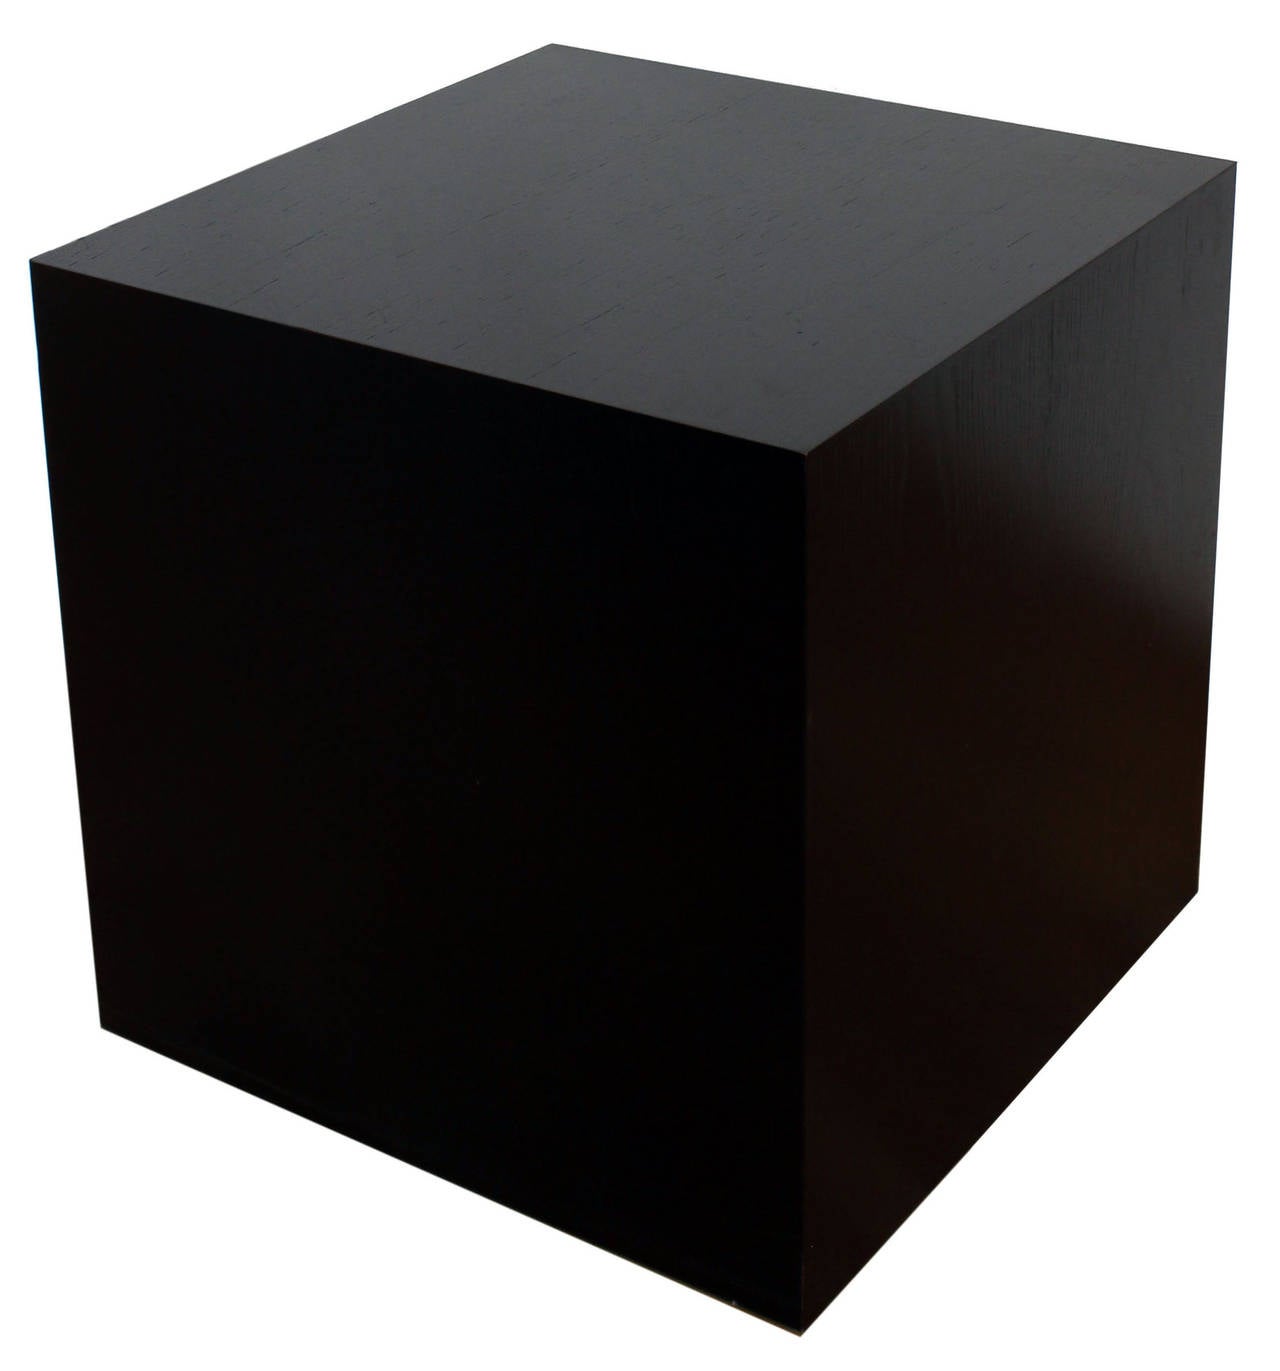 A pair of black oak cubes on casters, with visible wood grain, designed by British architect Max Gordon, and inspired by sculptor Donald Judd. Made by James Cooper of Moon Cabinet, NYC.

complimentary shipping within 30 miles.